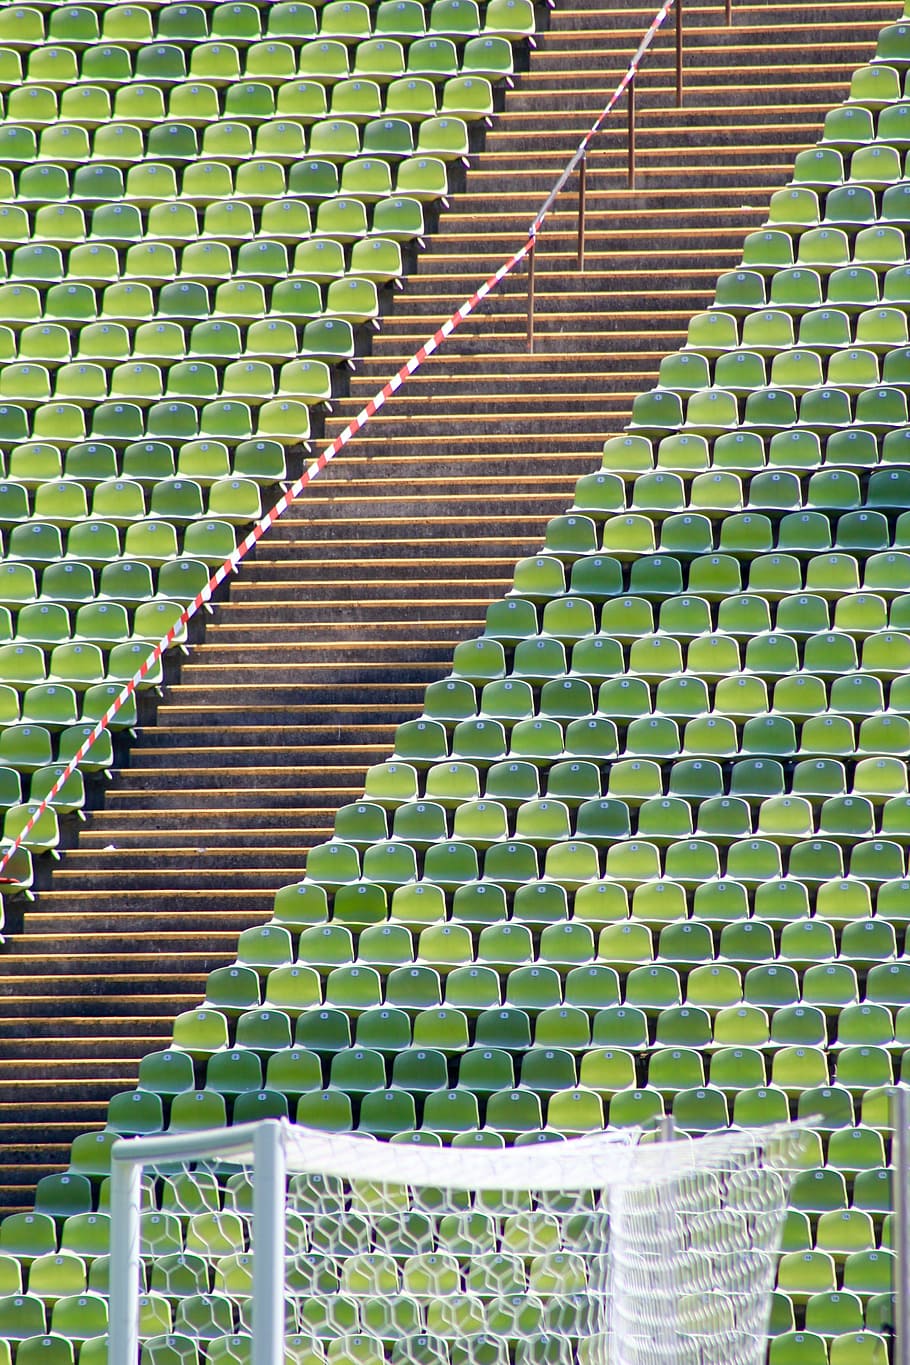 soccer goal, vacant, seats background, stadium, goal, football, olympic station, munich, sit, architecture